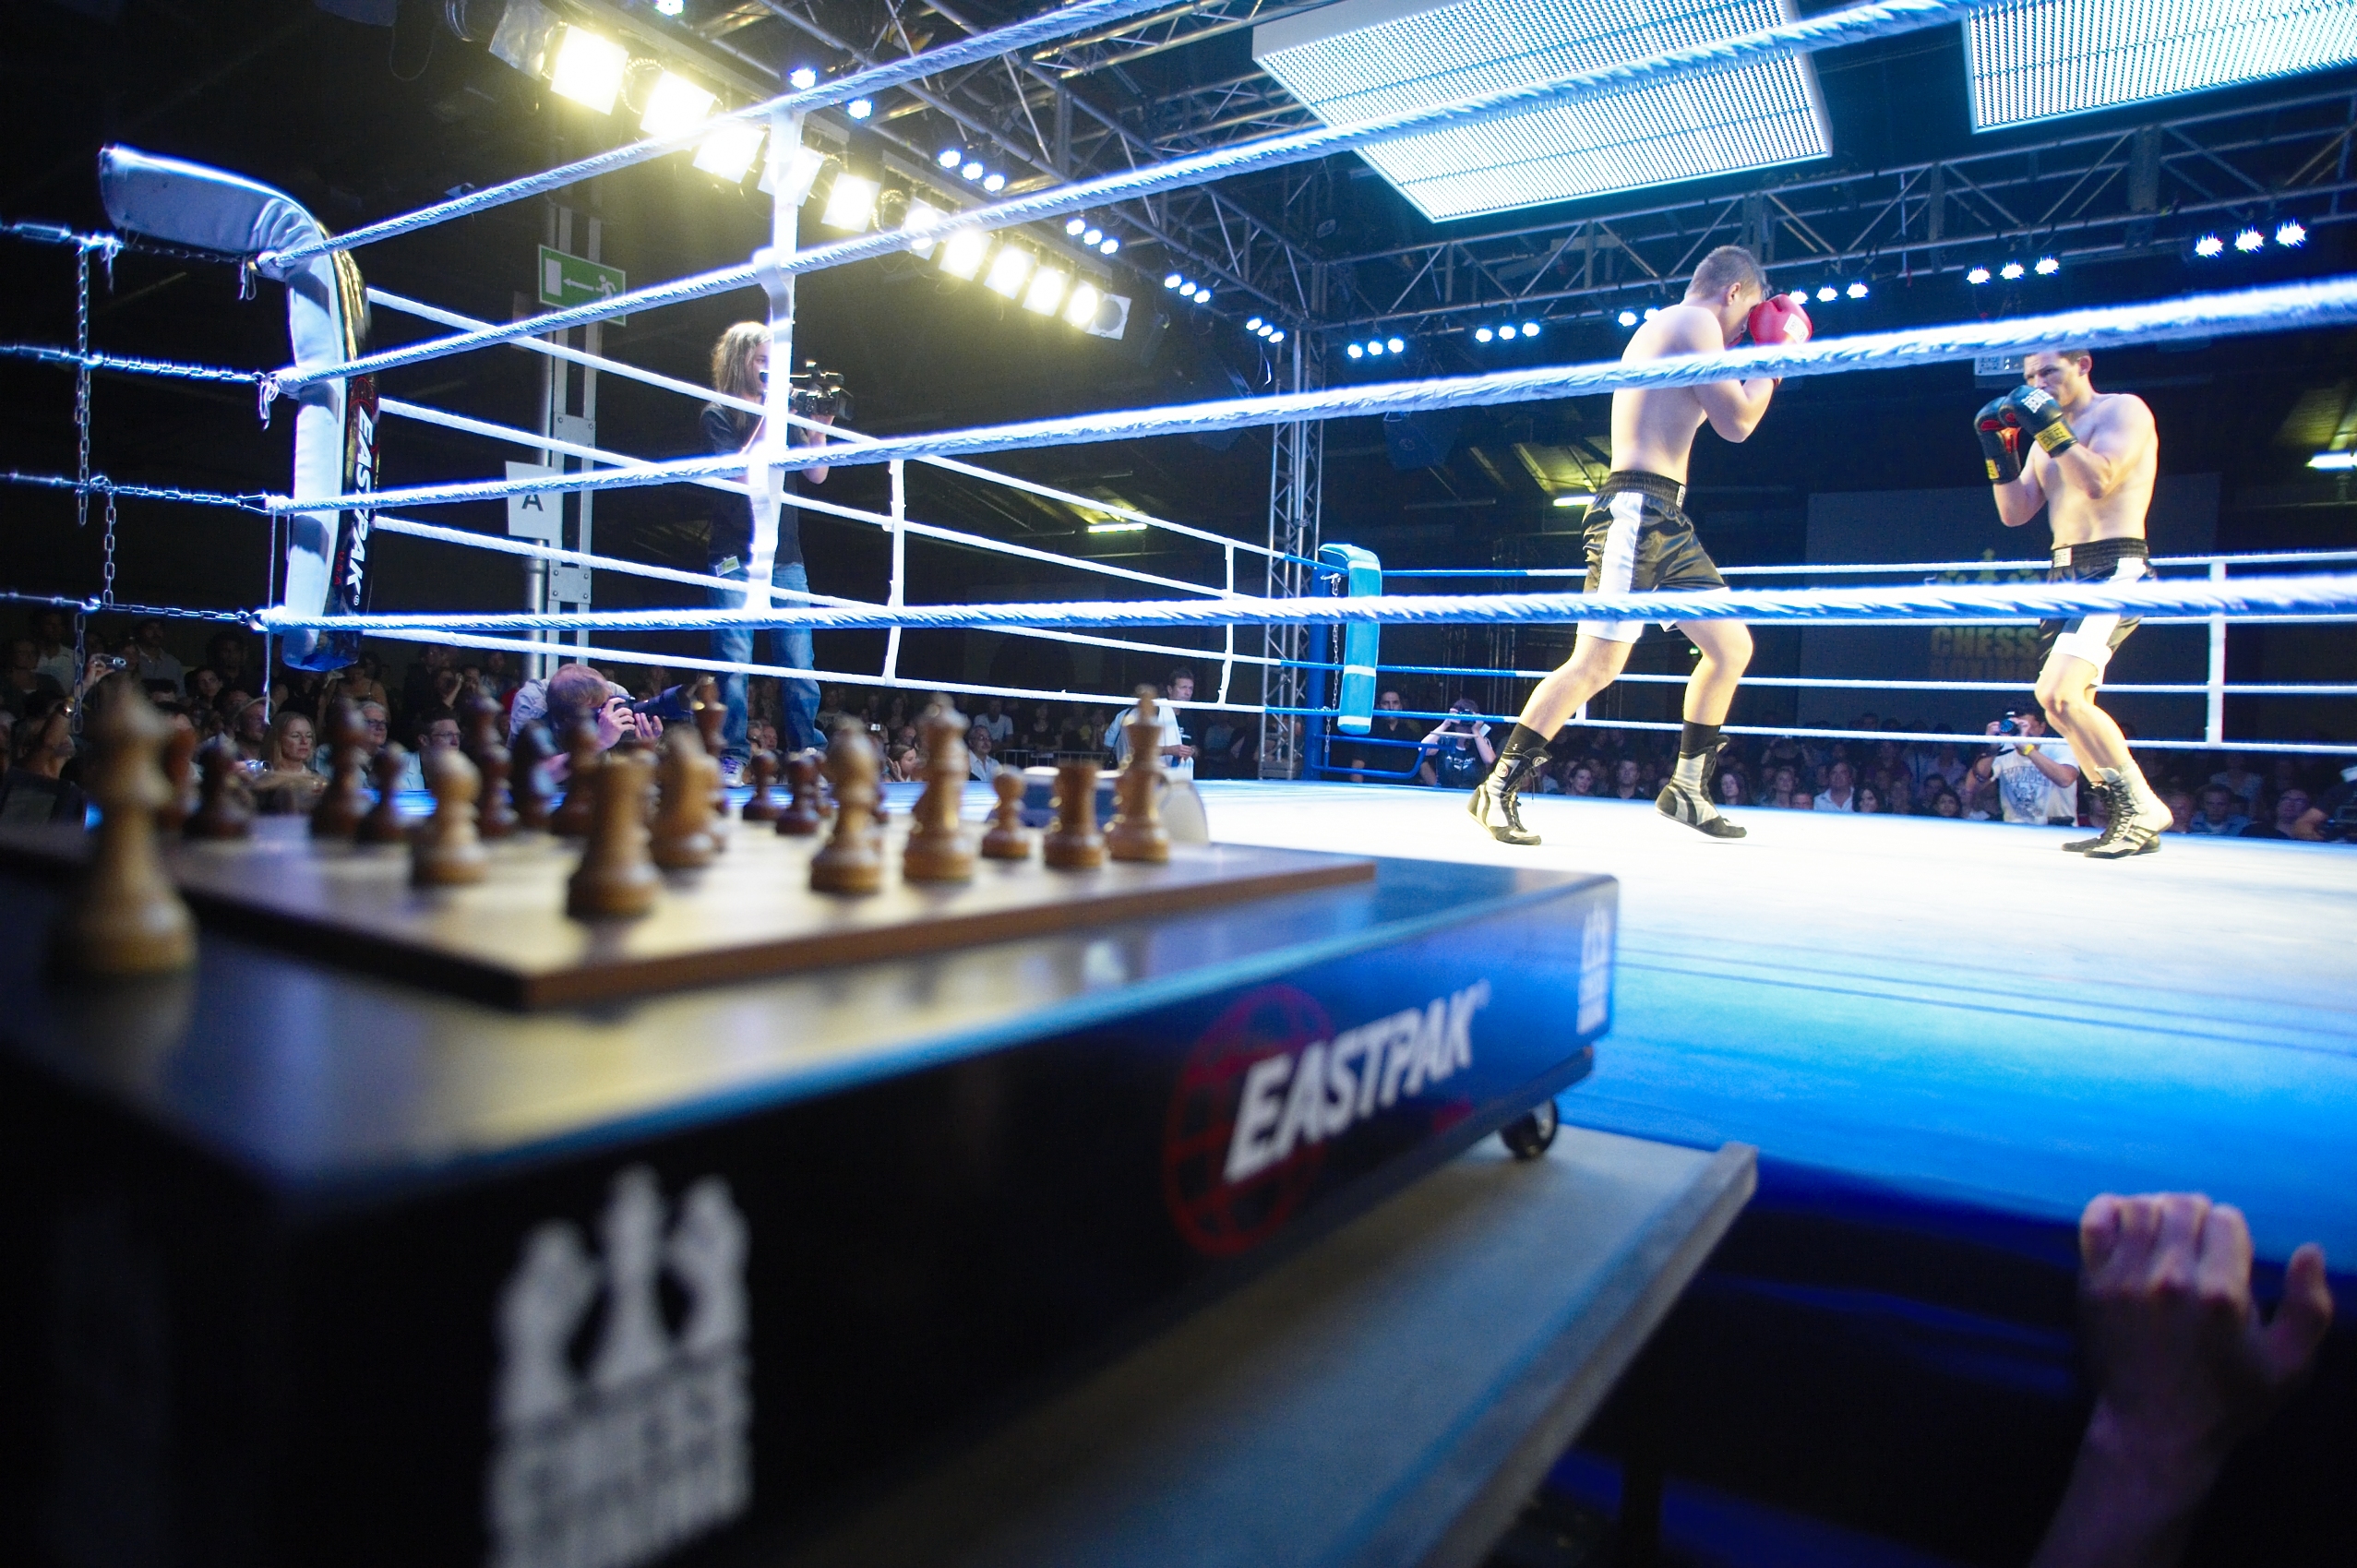 Chess Boxing - Rules and Guide - Our Sporting Life